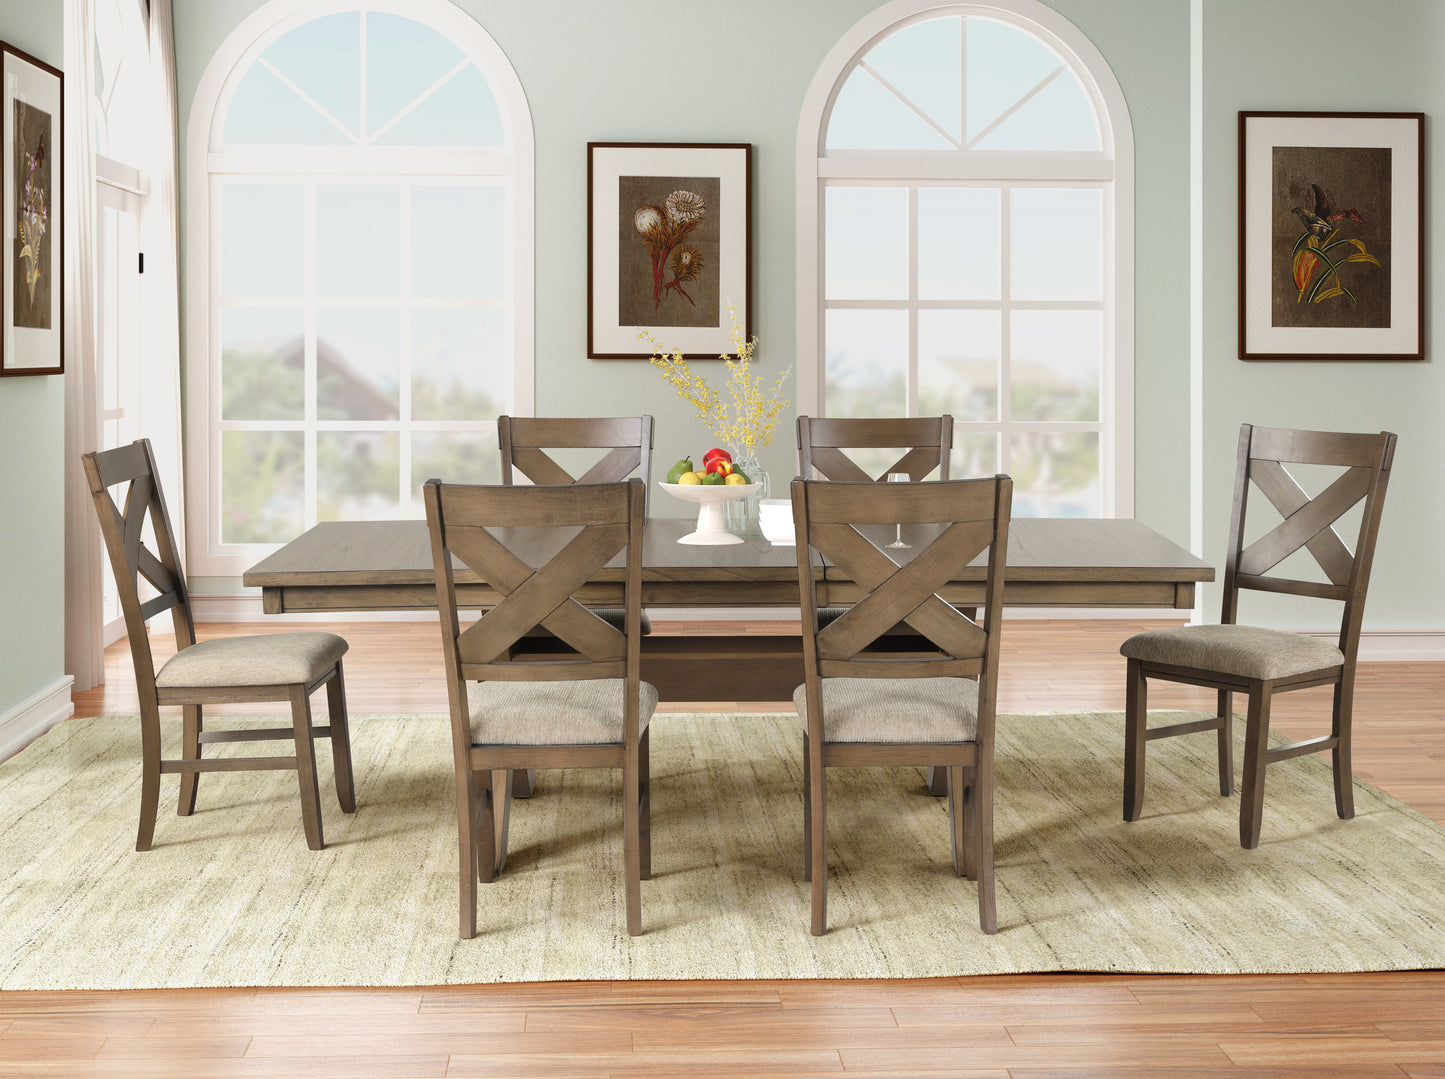 Raven Wood 7-Piece Dining Set, Extendable Trestle Dining Table with 6 Chairs, Glazed Pine Brown